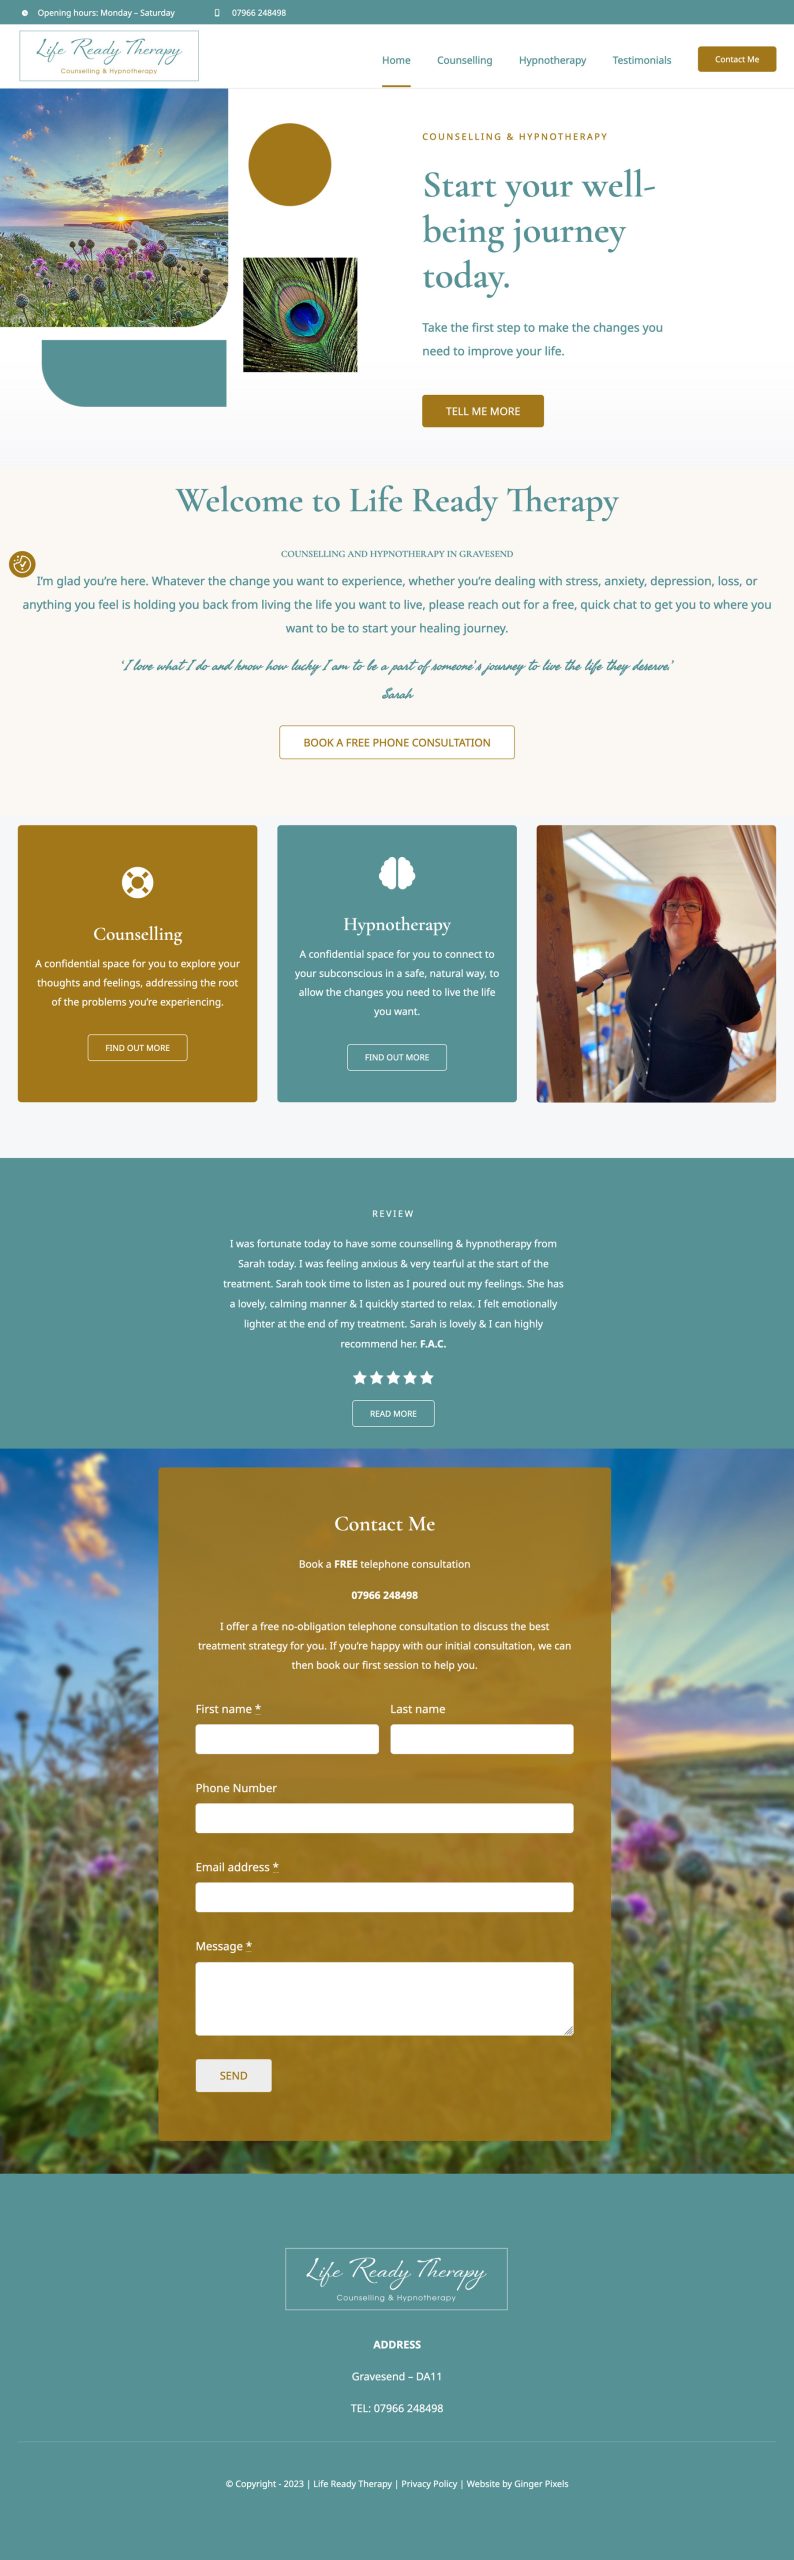 COUNSELLING AND HYPNOTHERAPY WEBSITE DESIGN